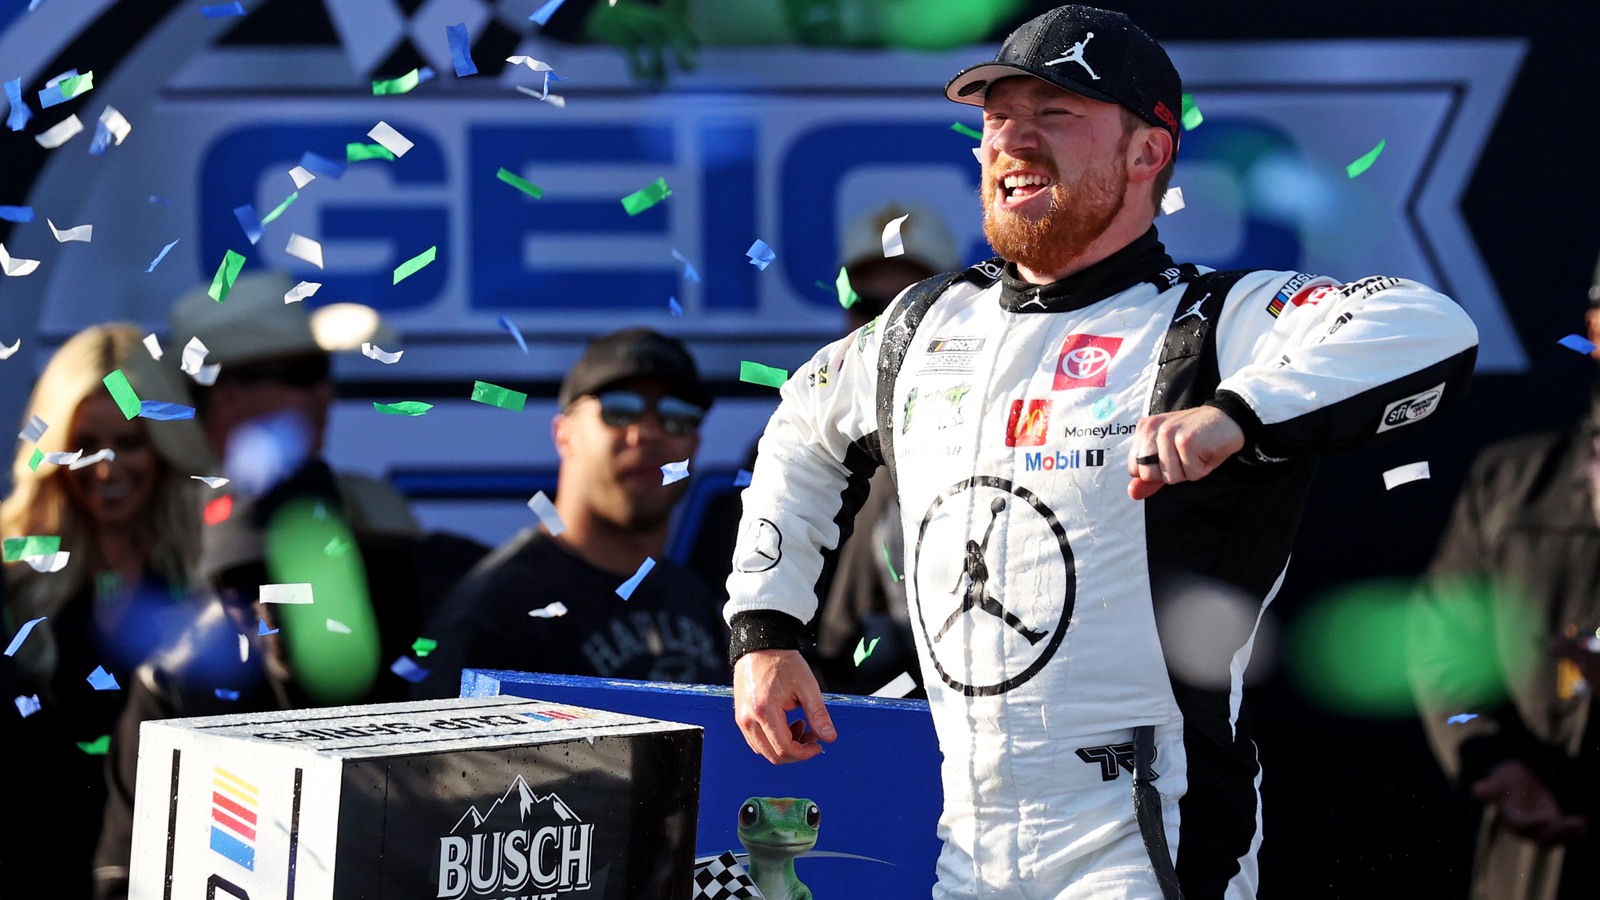 Watch: Tyler Reddick steals the win from Brad Keselowski on the final lap at Talladega after Michael McDowell collects the field in the Big One